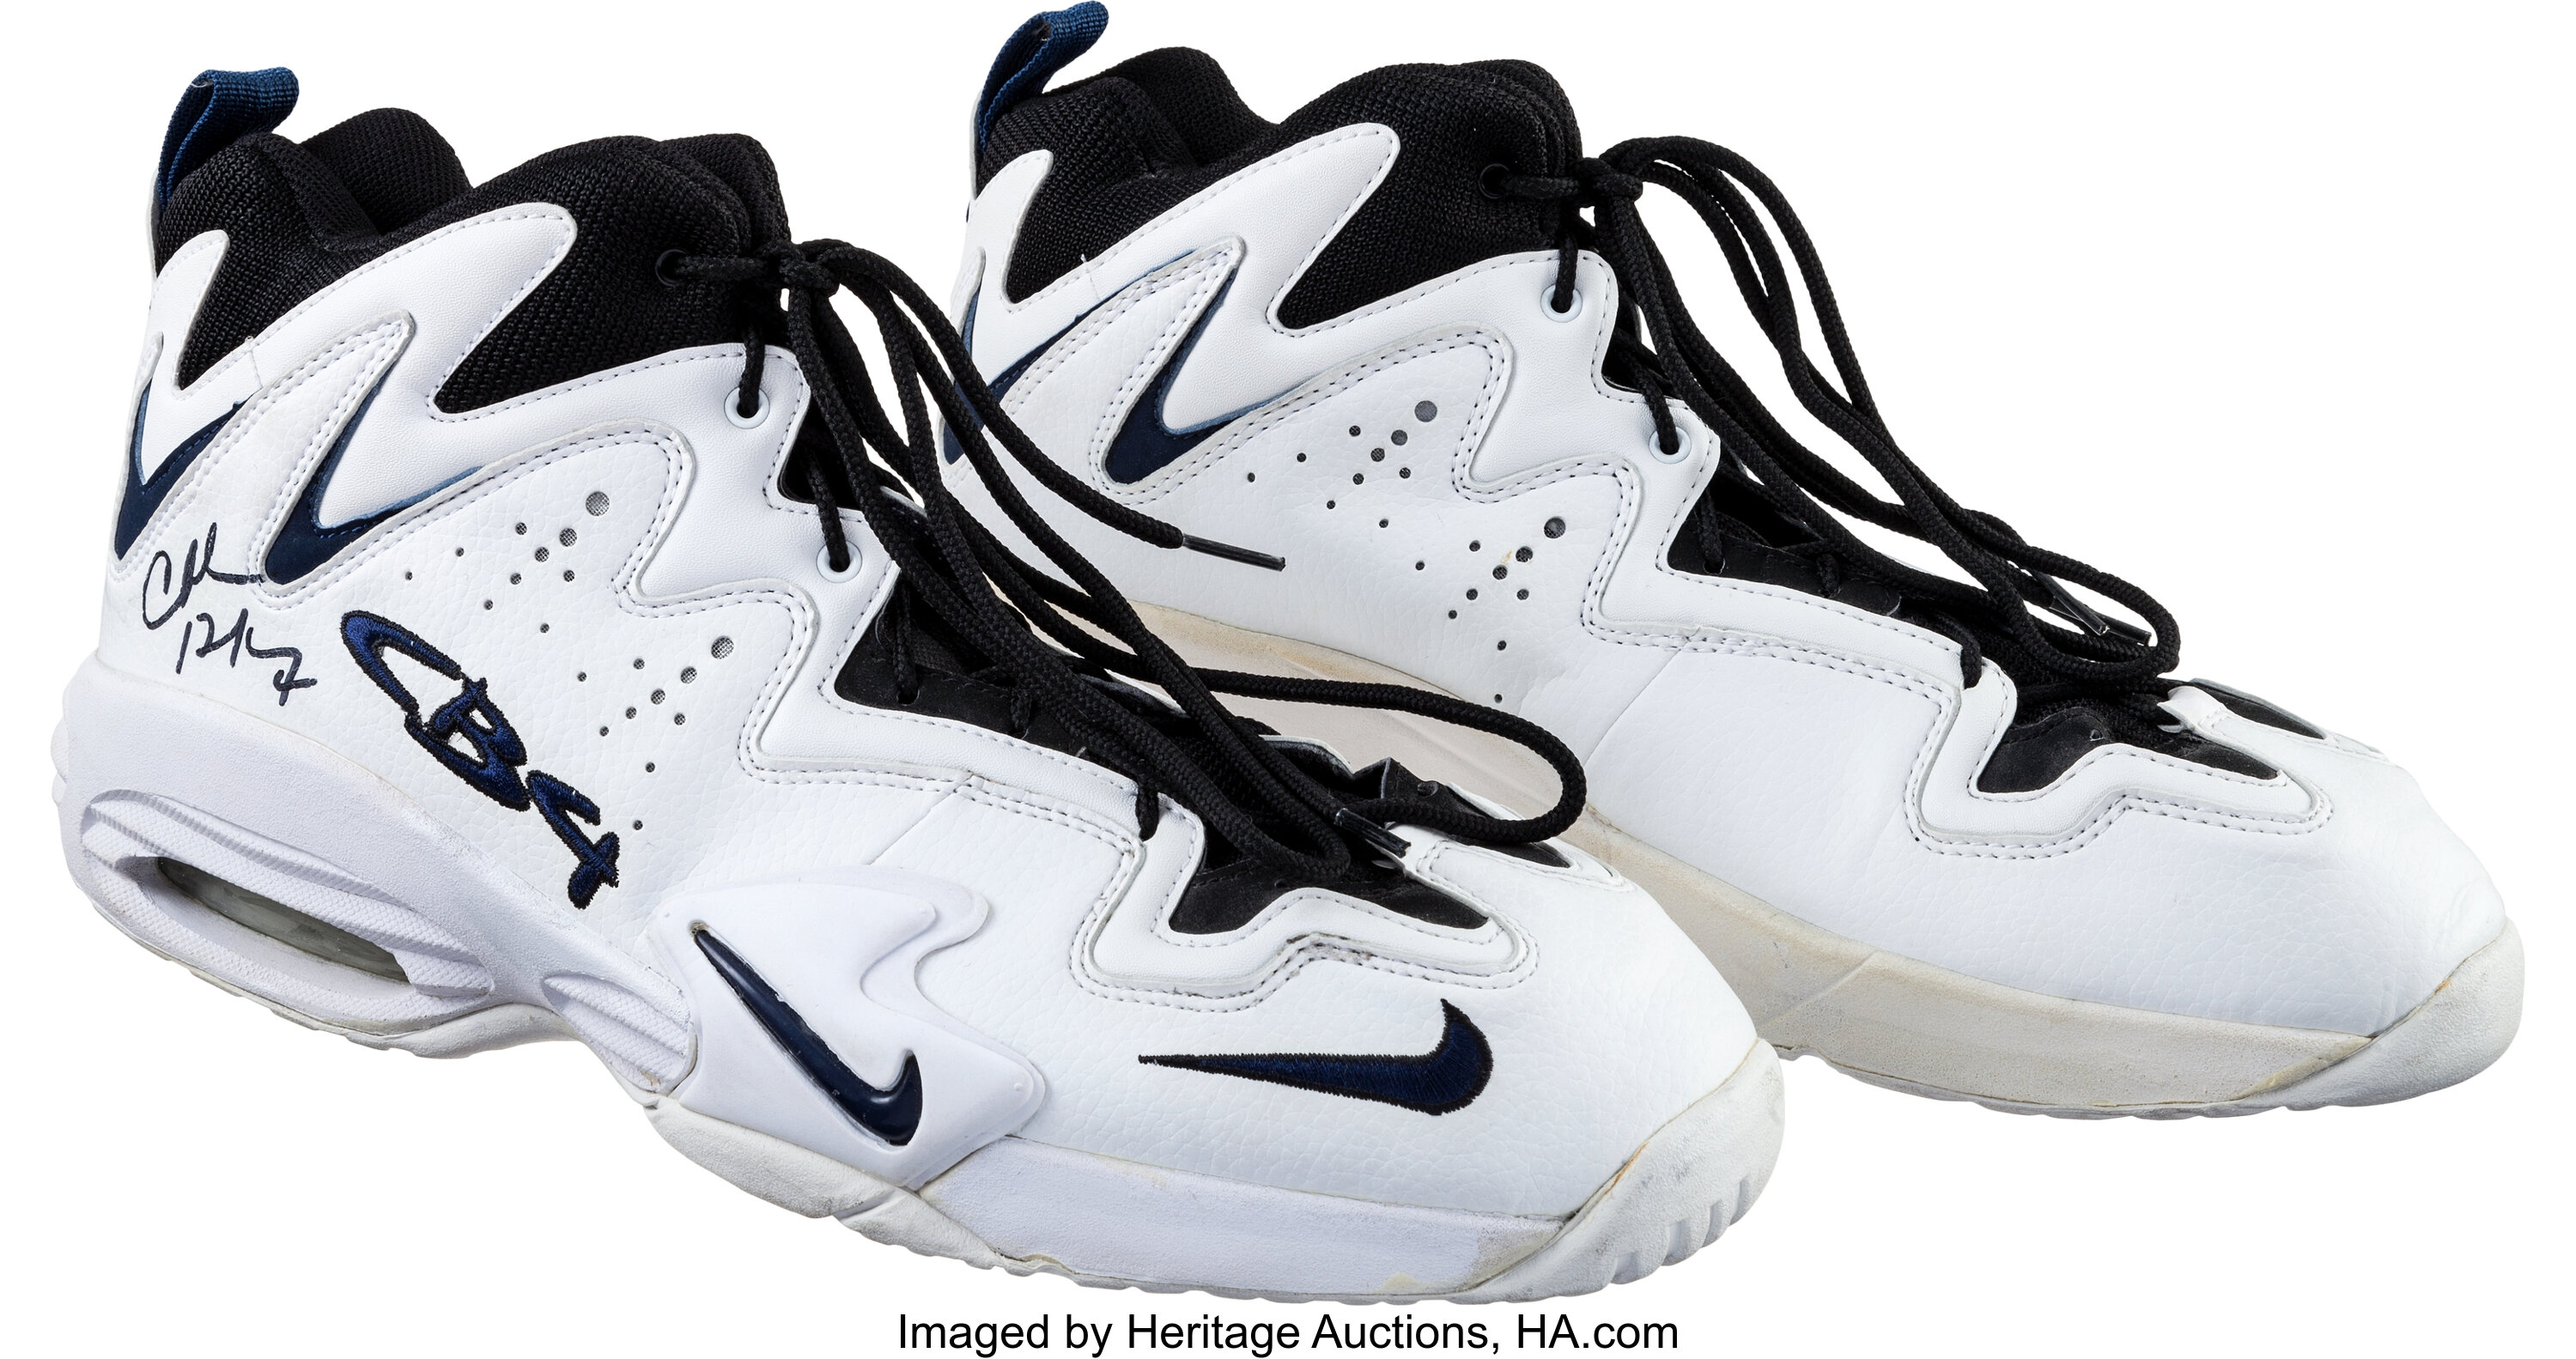 Charles Barkley Shoes: A Full Timeline - WearTesters